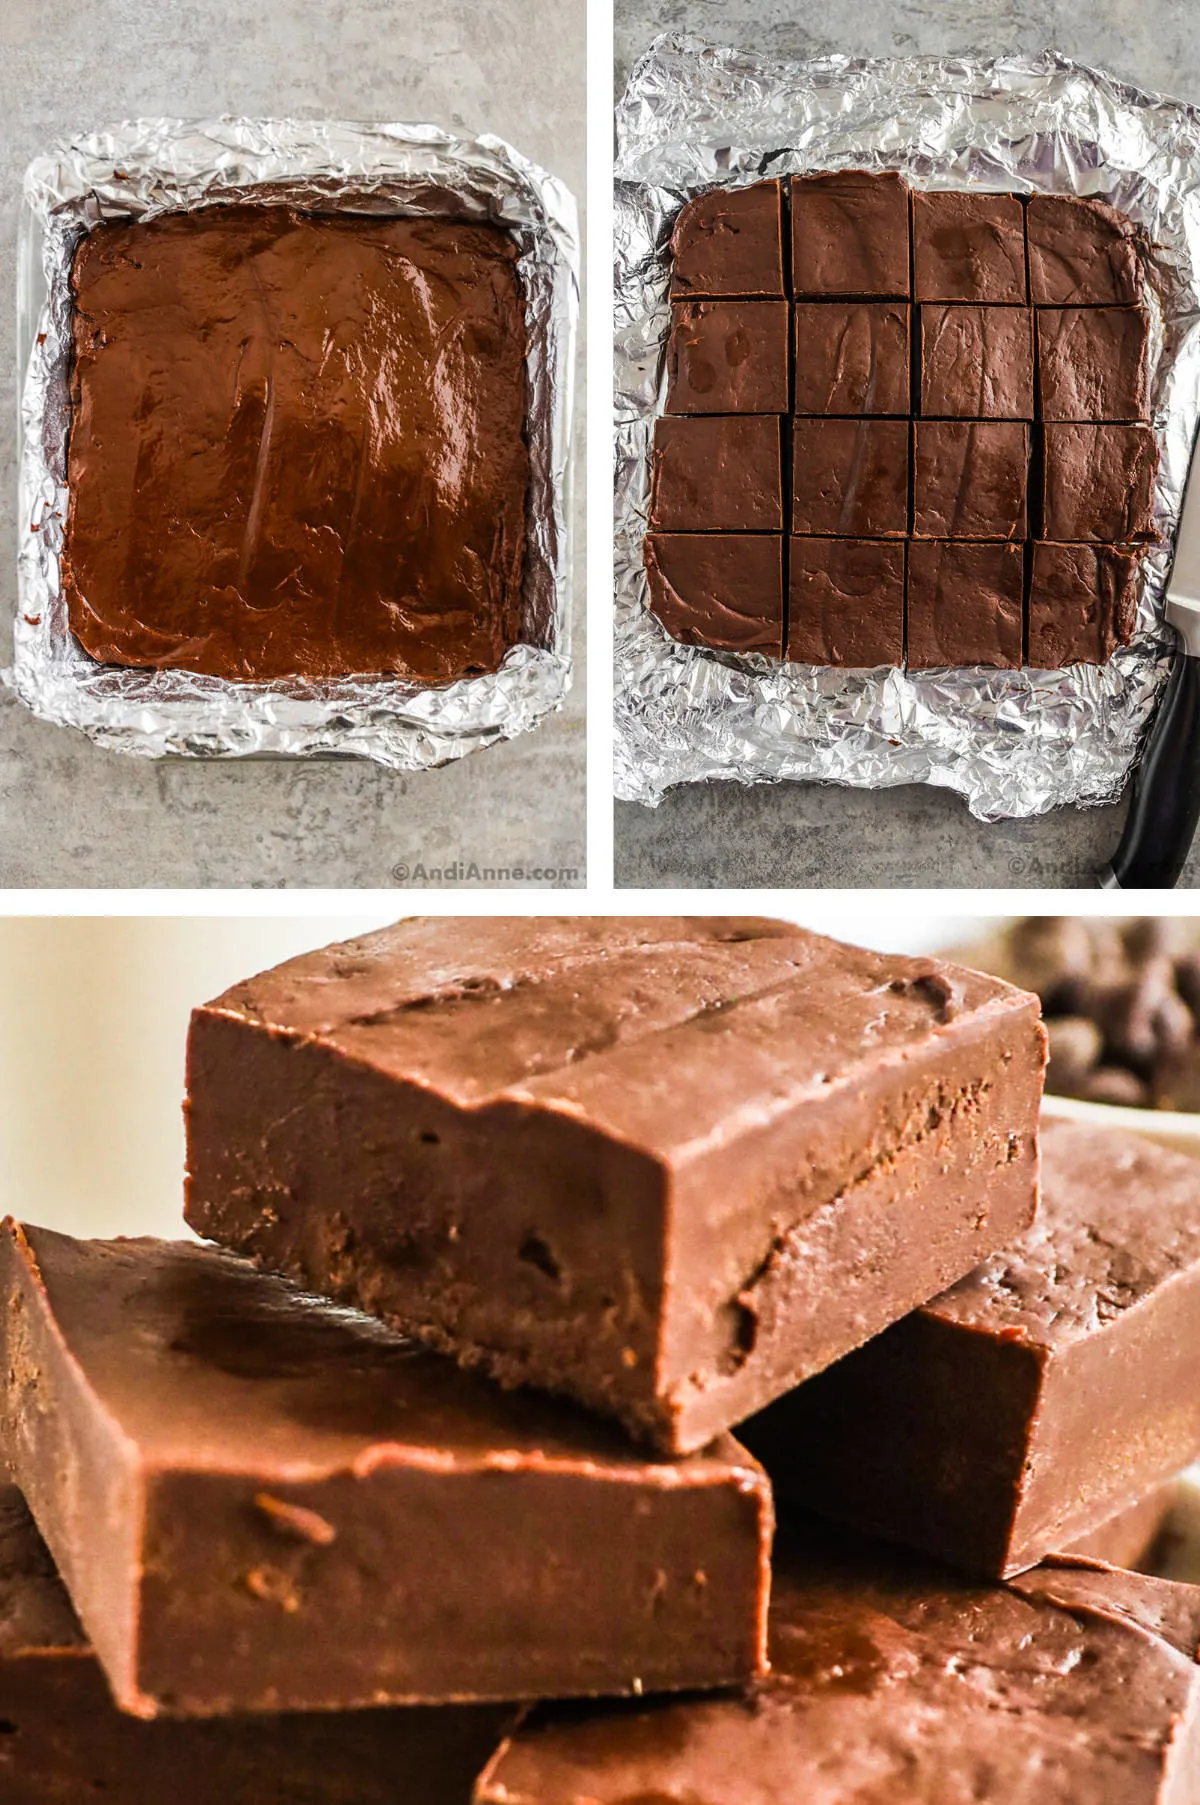 Three overhead images in one: 1. Fudge mixture is poured into the baking pan. 2. Fudge is cooled and cut into squares. 3. Closeup of slices of fudge stacked. 